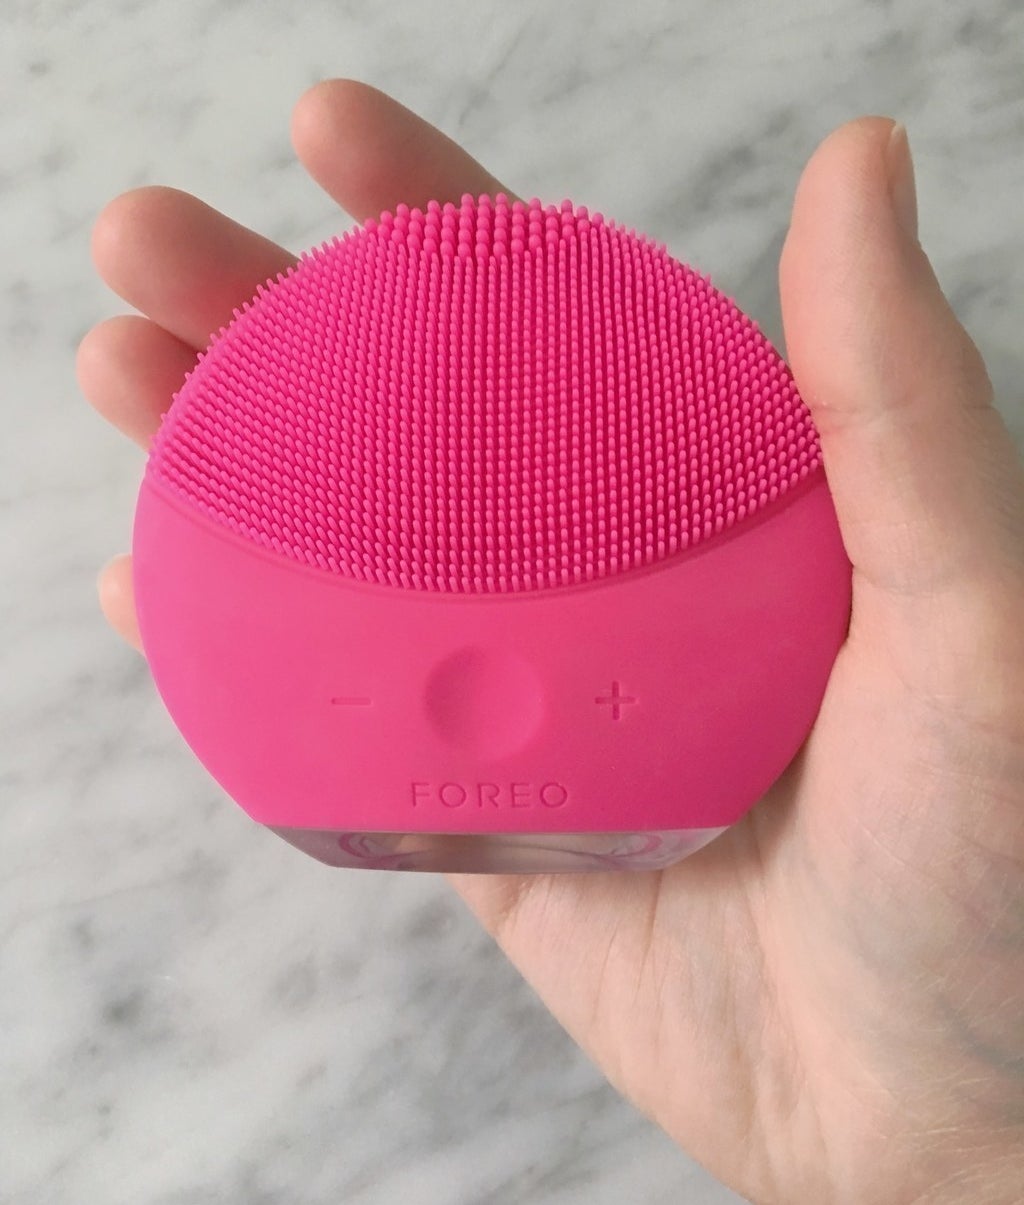 This 60-Second Face Cleansing Device Is A Game-Changer For Your Skin Care  Routine